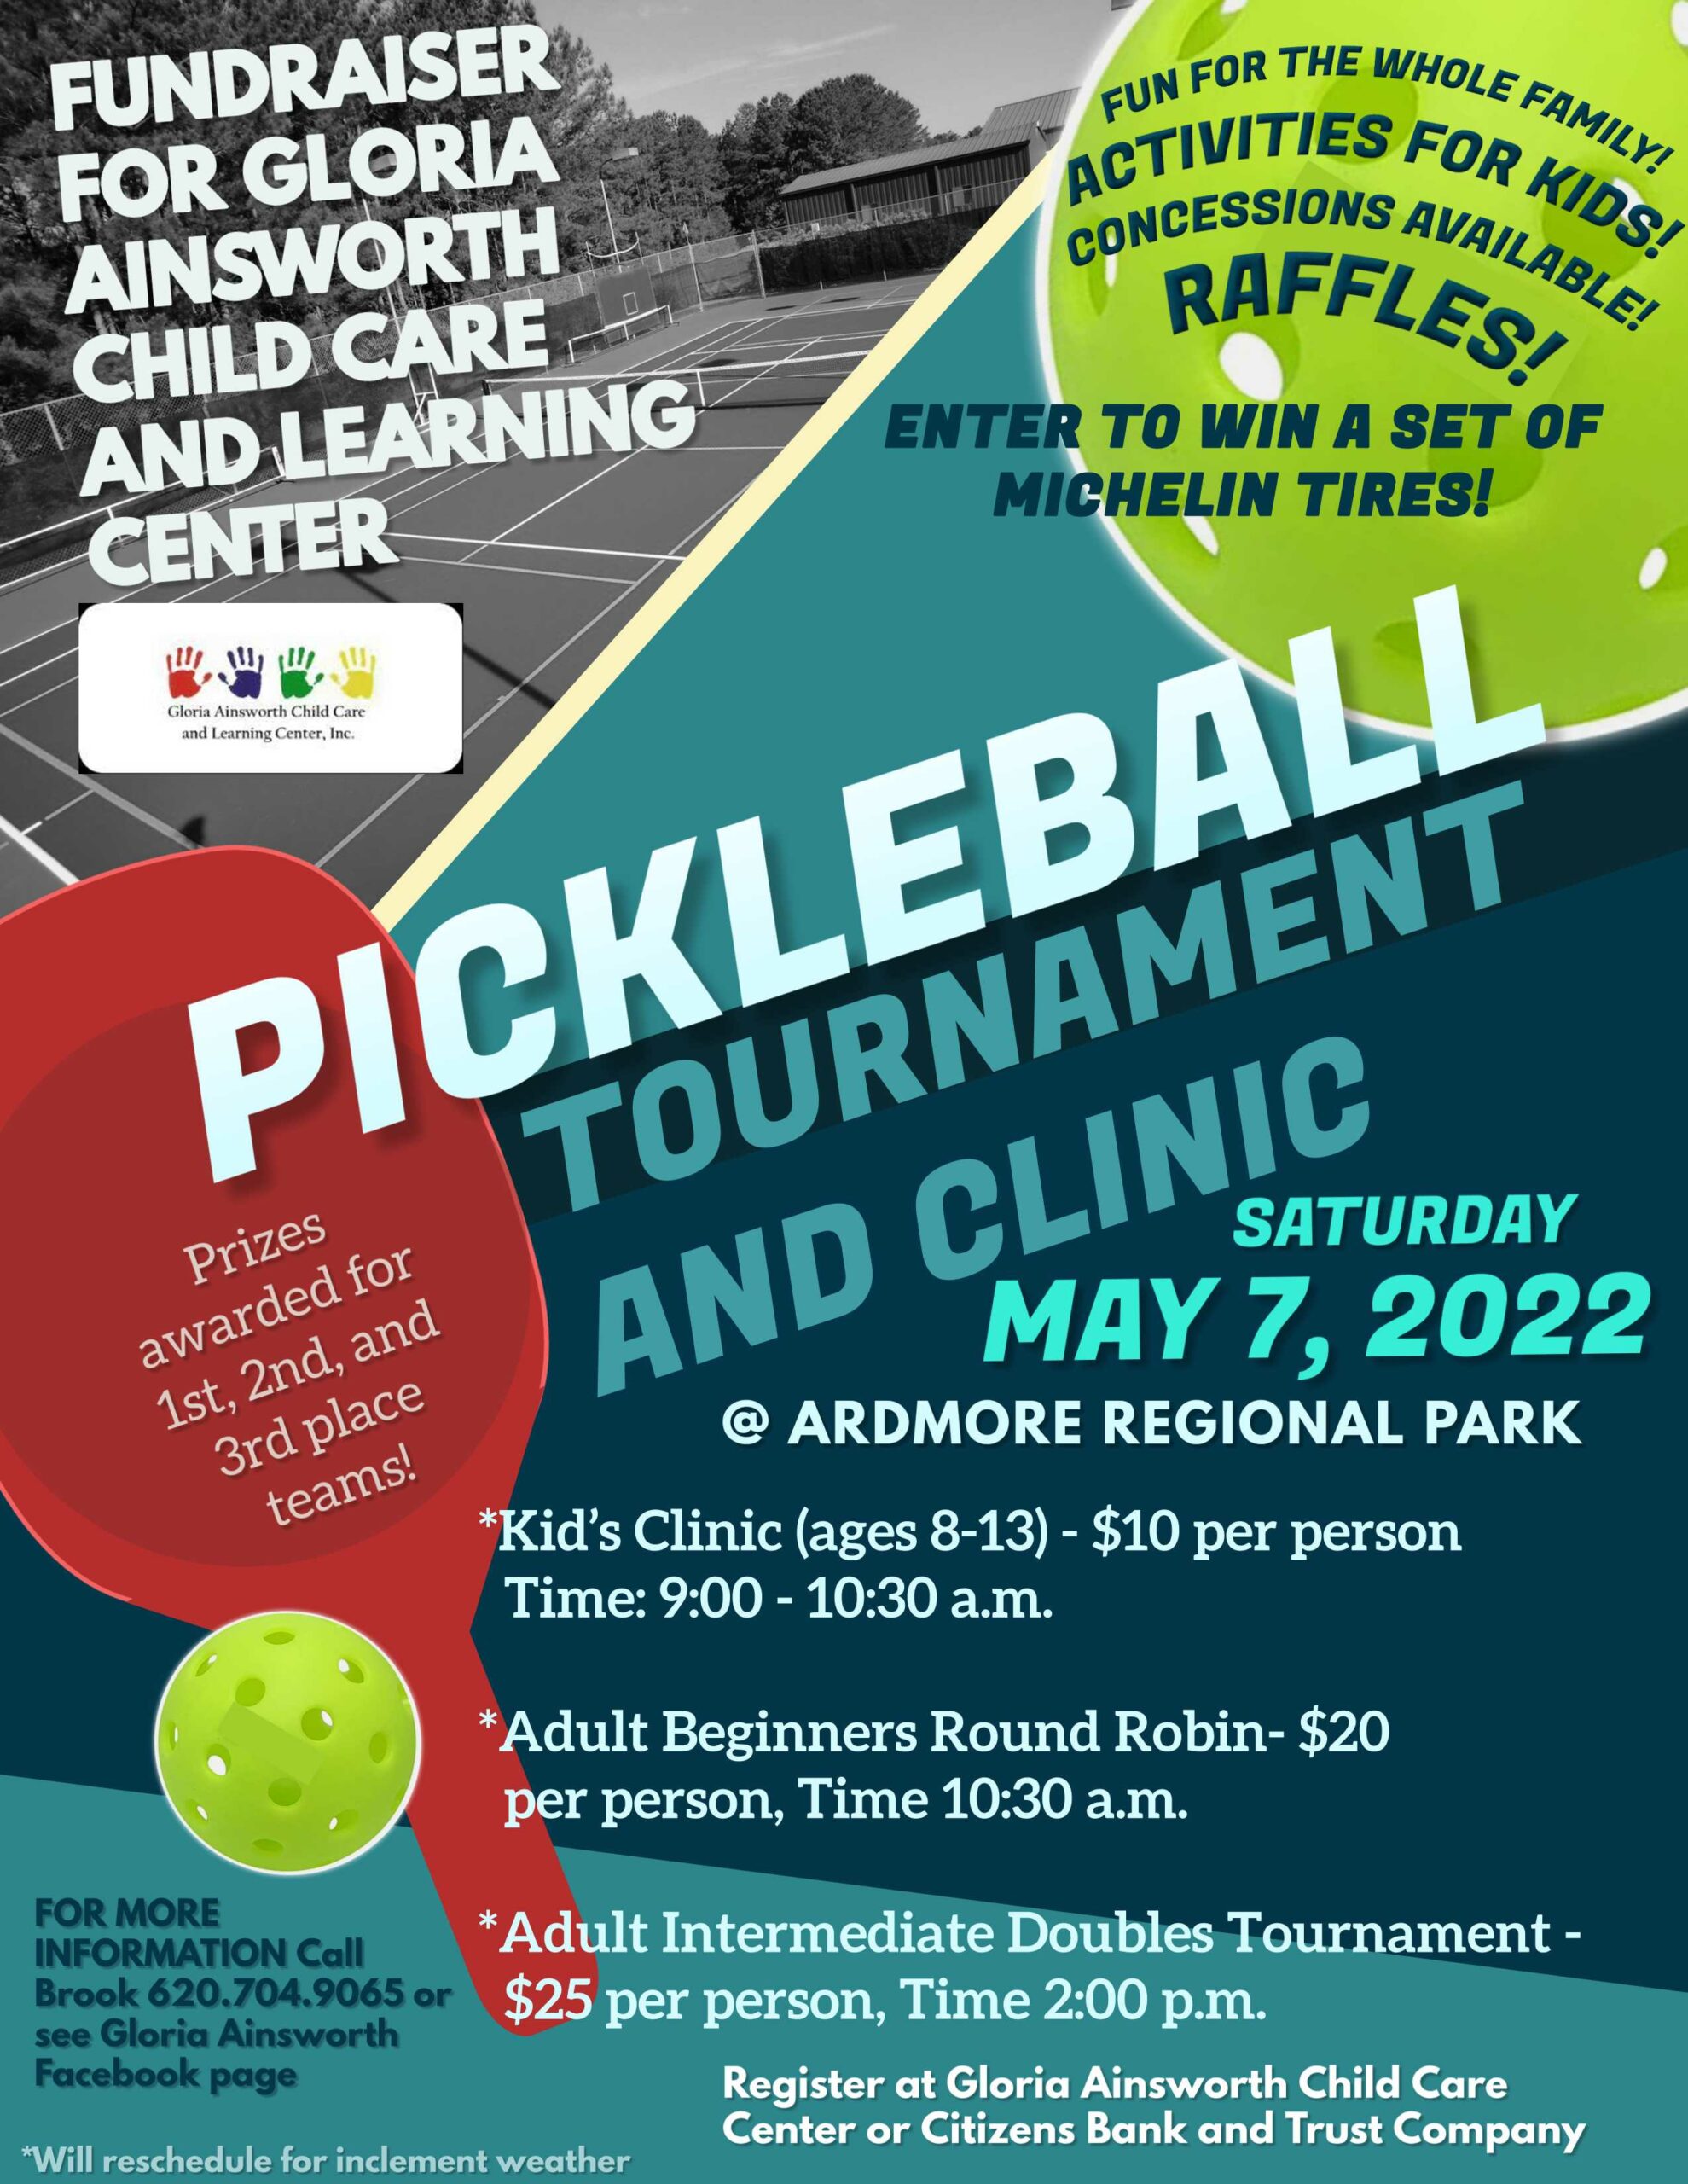 Pickleball Tournament and Clinic